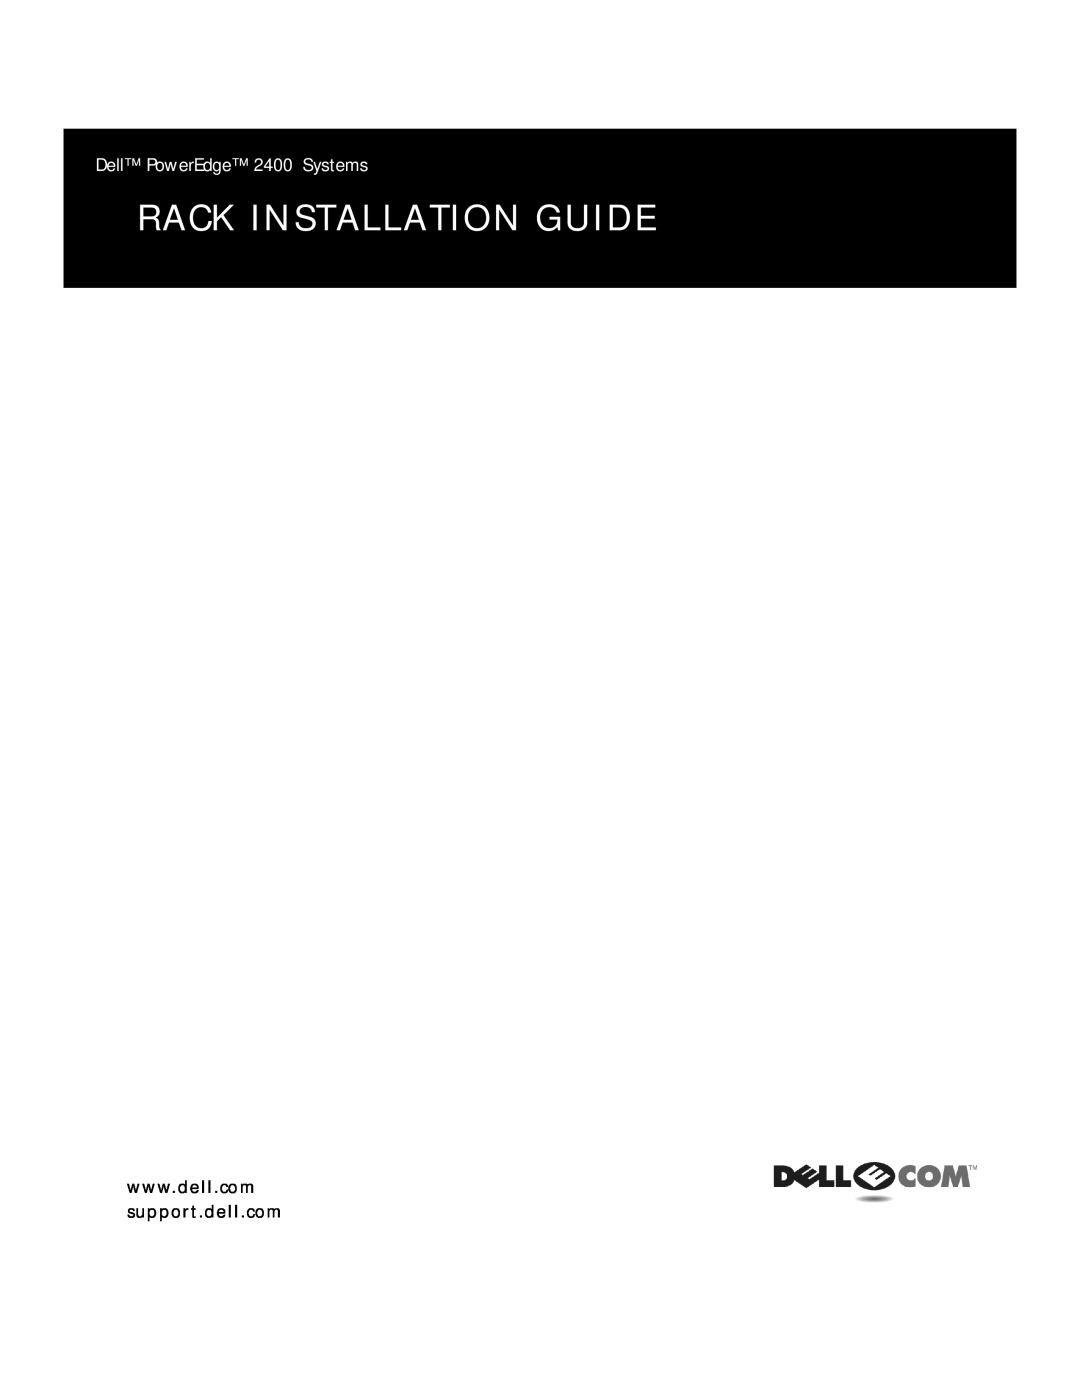 Dell manual Rack Installation Guide, Dell PowerEdge 2400 Systems 